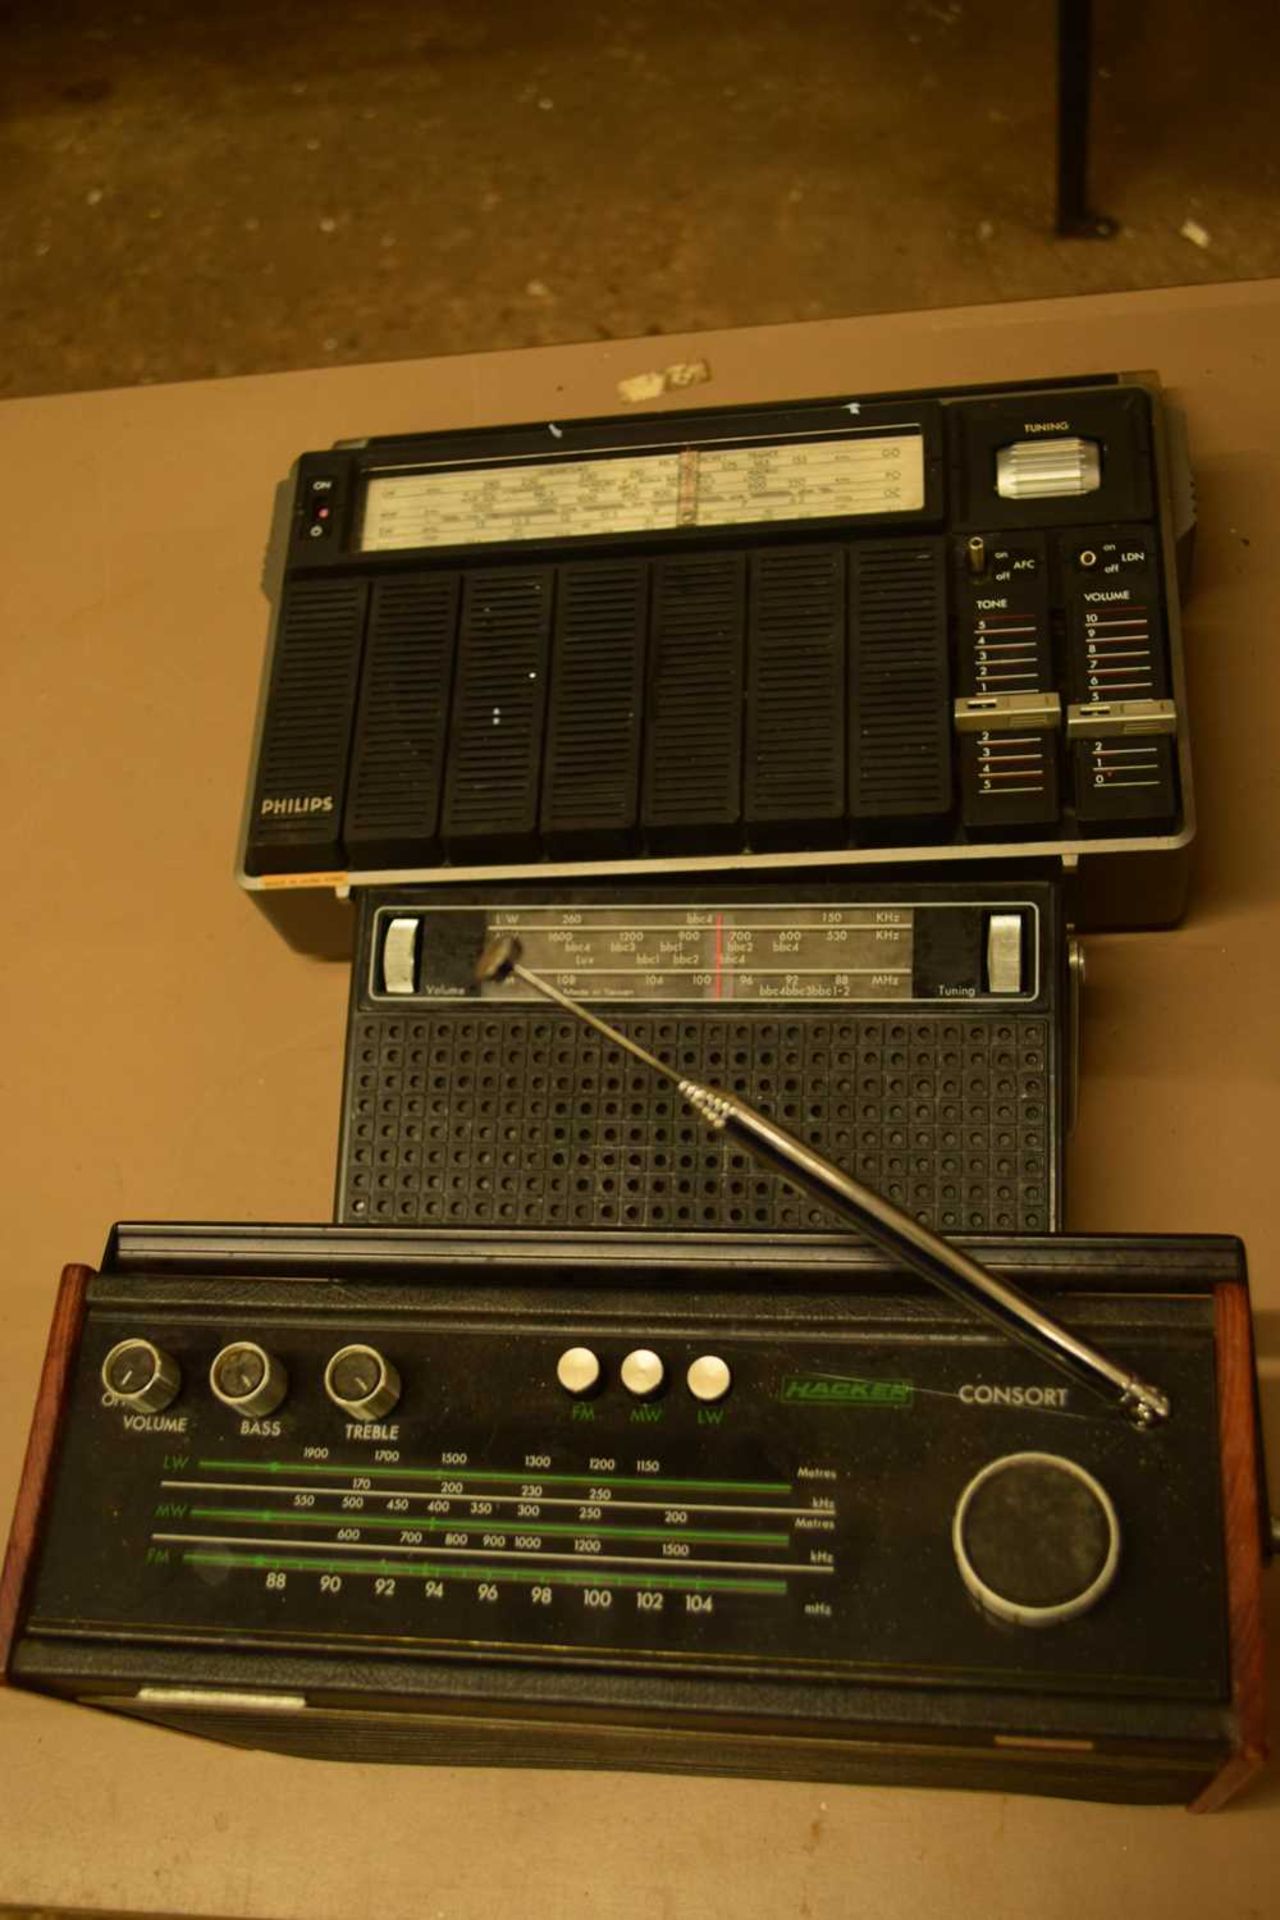 MIXED LOT: 5 RADIOS TO INCLUDE:HACKER CONSORT (1978), ULTRA MODEL 6193 (1979), PHILIPS 870 (1979), - Image 2 of 4